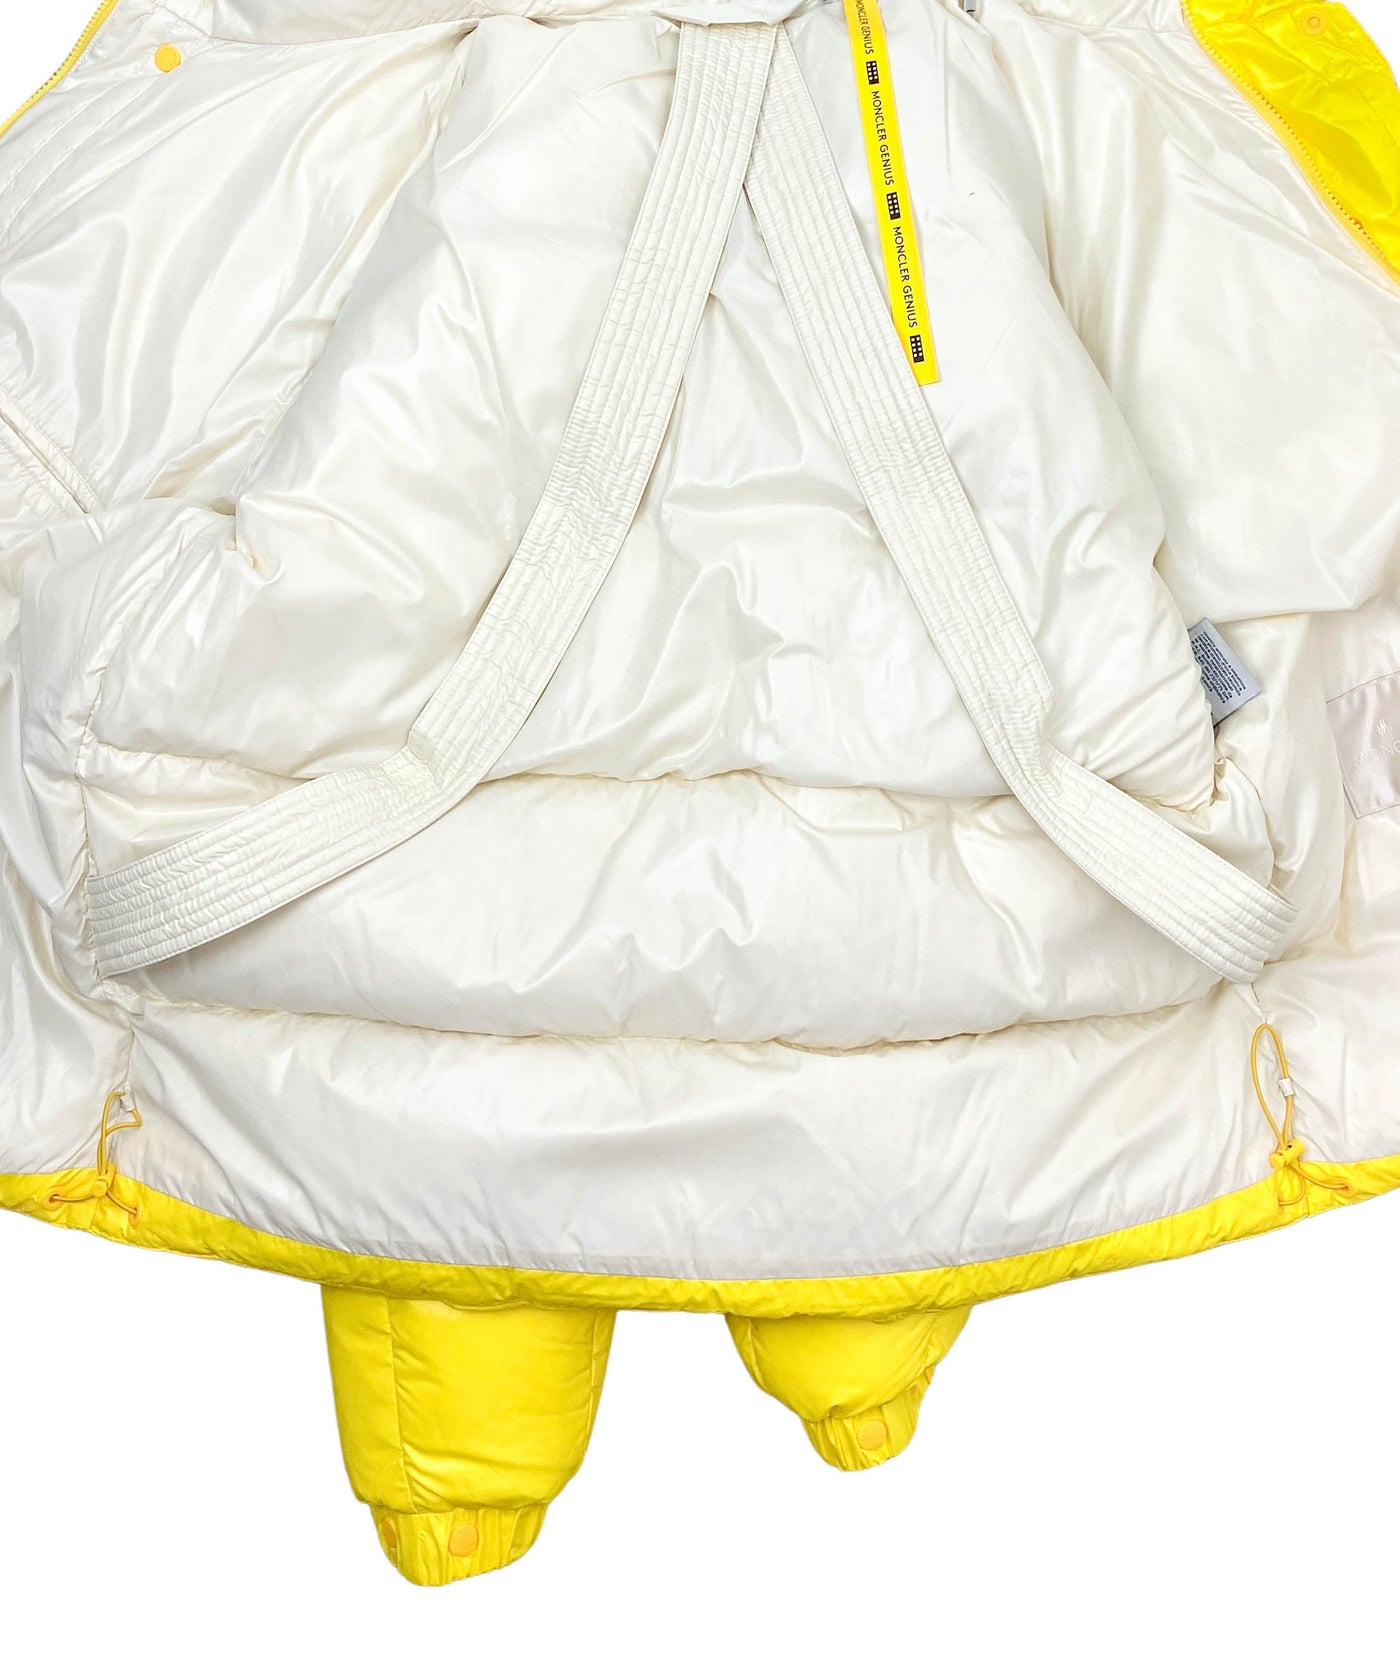 Moncler Genius Puffer Jacket in Yellow - Discounts on Moncler at UAL